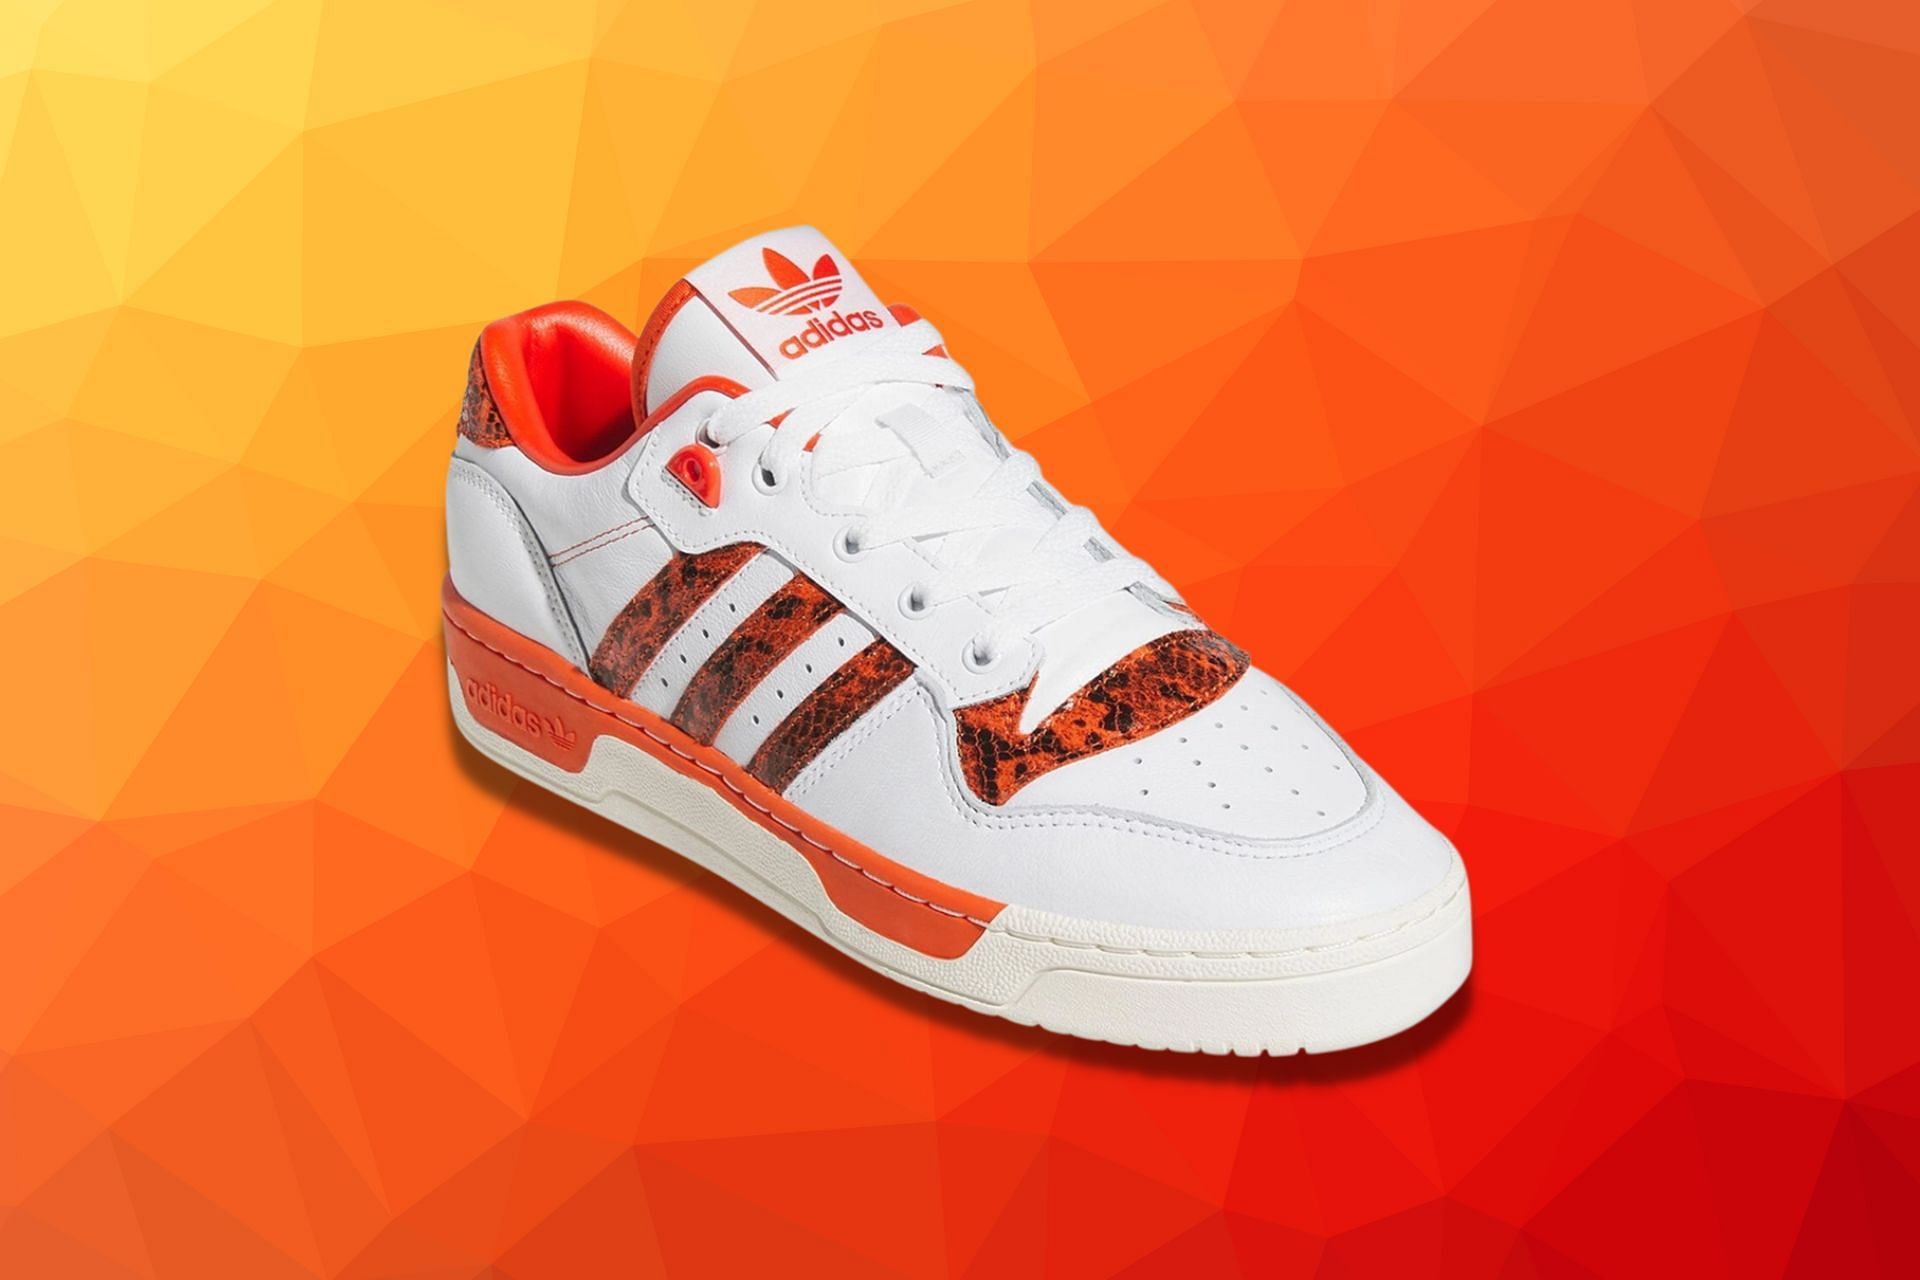 Where to buy Adidas Low “Orange shoes? Everything we know so